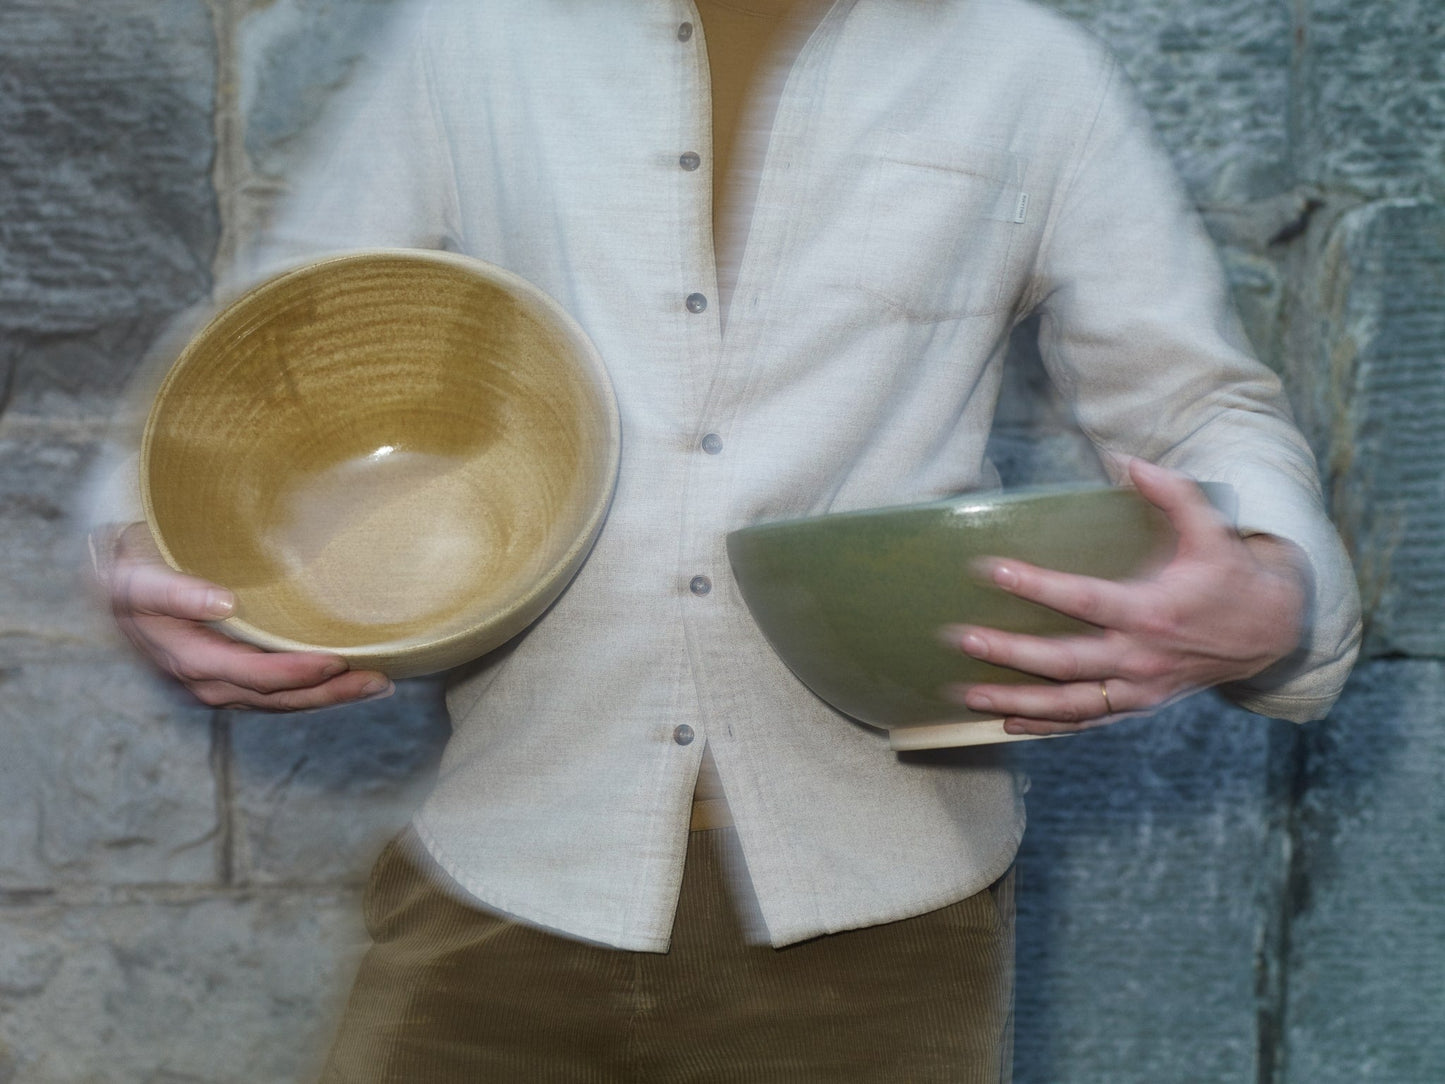 ALT=James holding two Claire Henry bowls in ochre and green